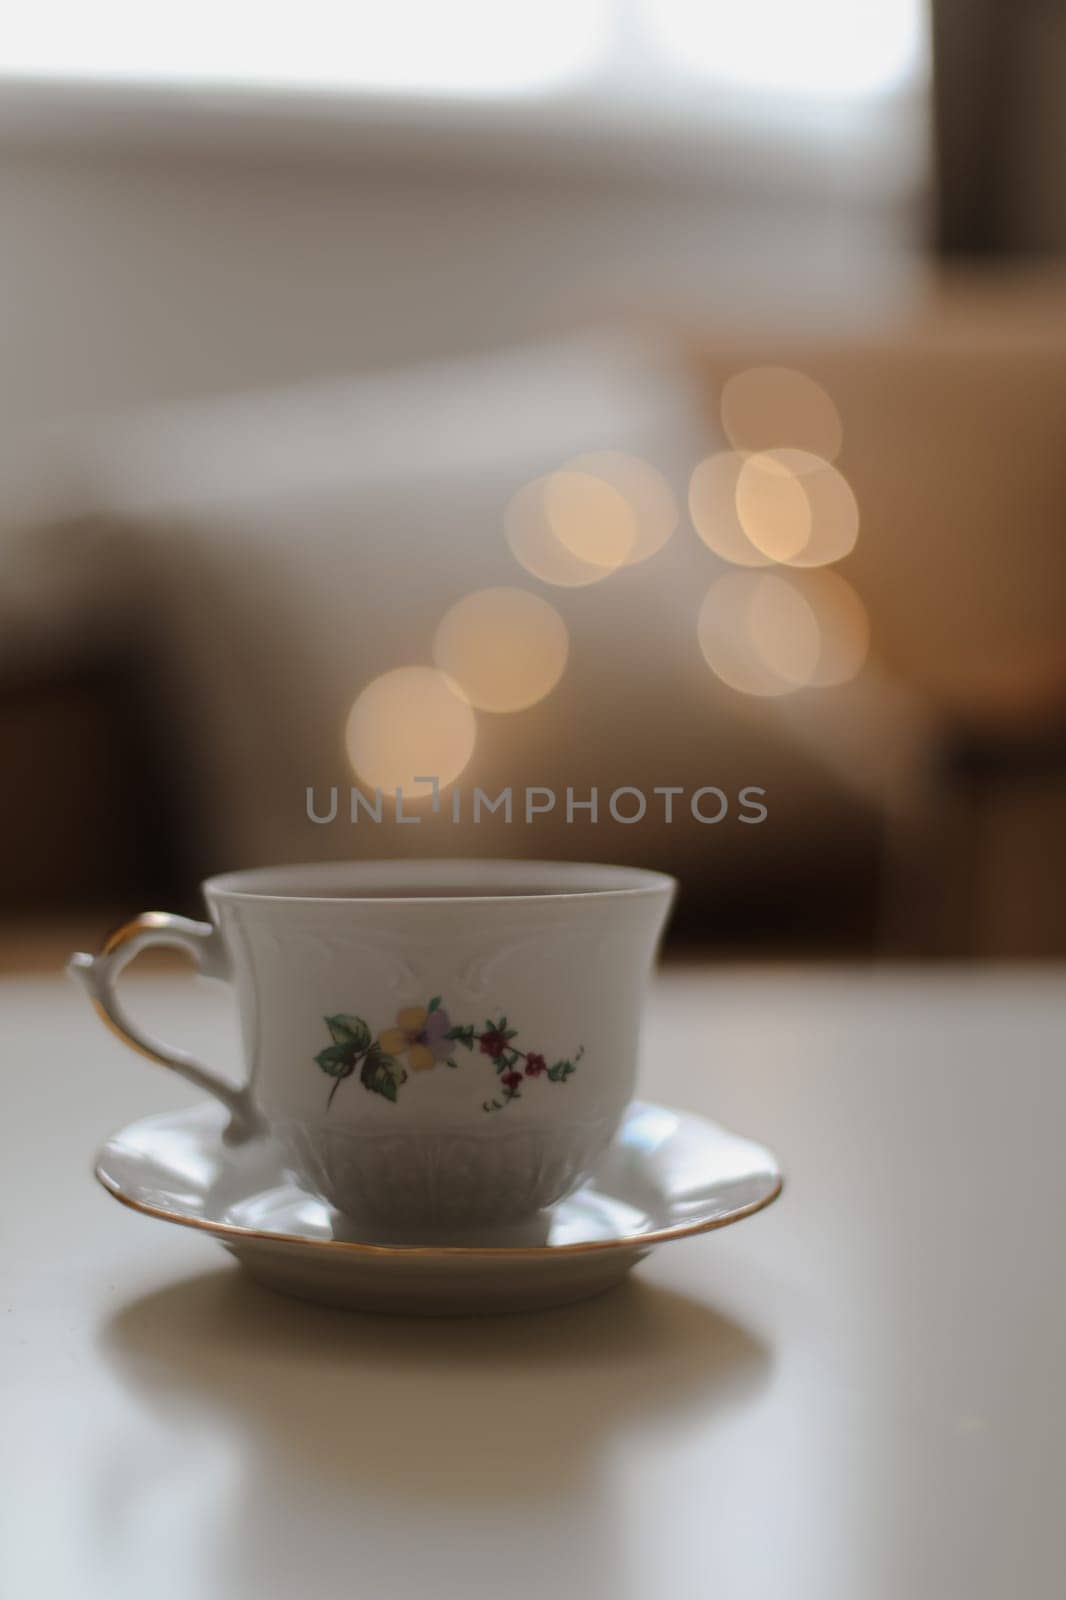 coffee cup on the table with blur background - soft focus, vintage style color effect